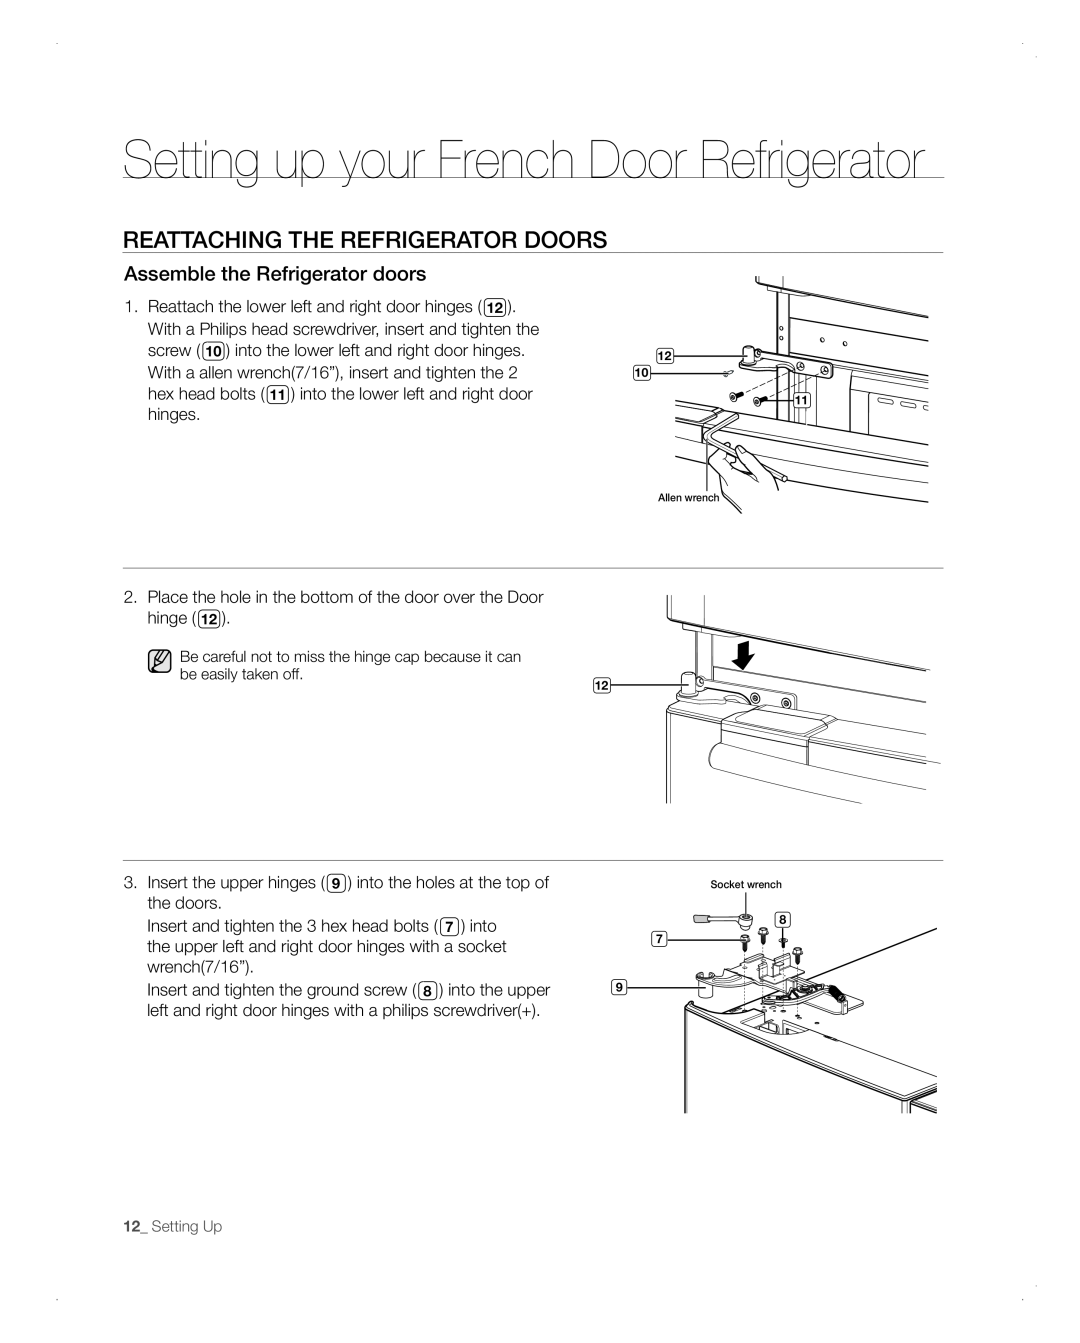 Samsung RFG298AARS user manual REAttACHinG tHE REFRiGERAtoR DooRs, Setting up your French Door Refrigerator 